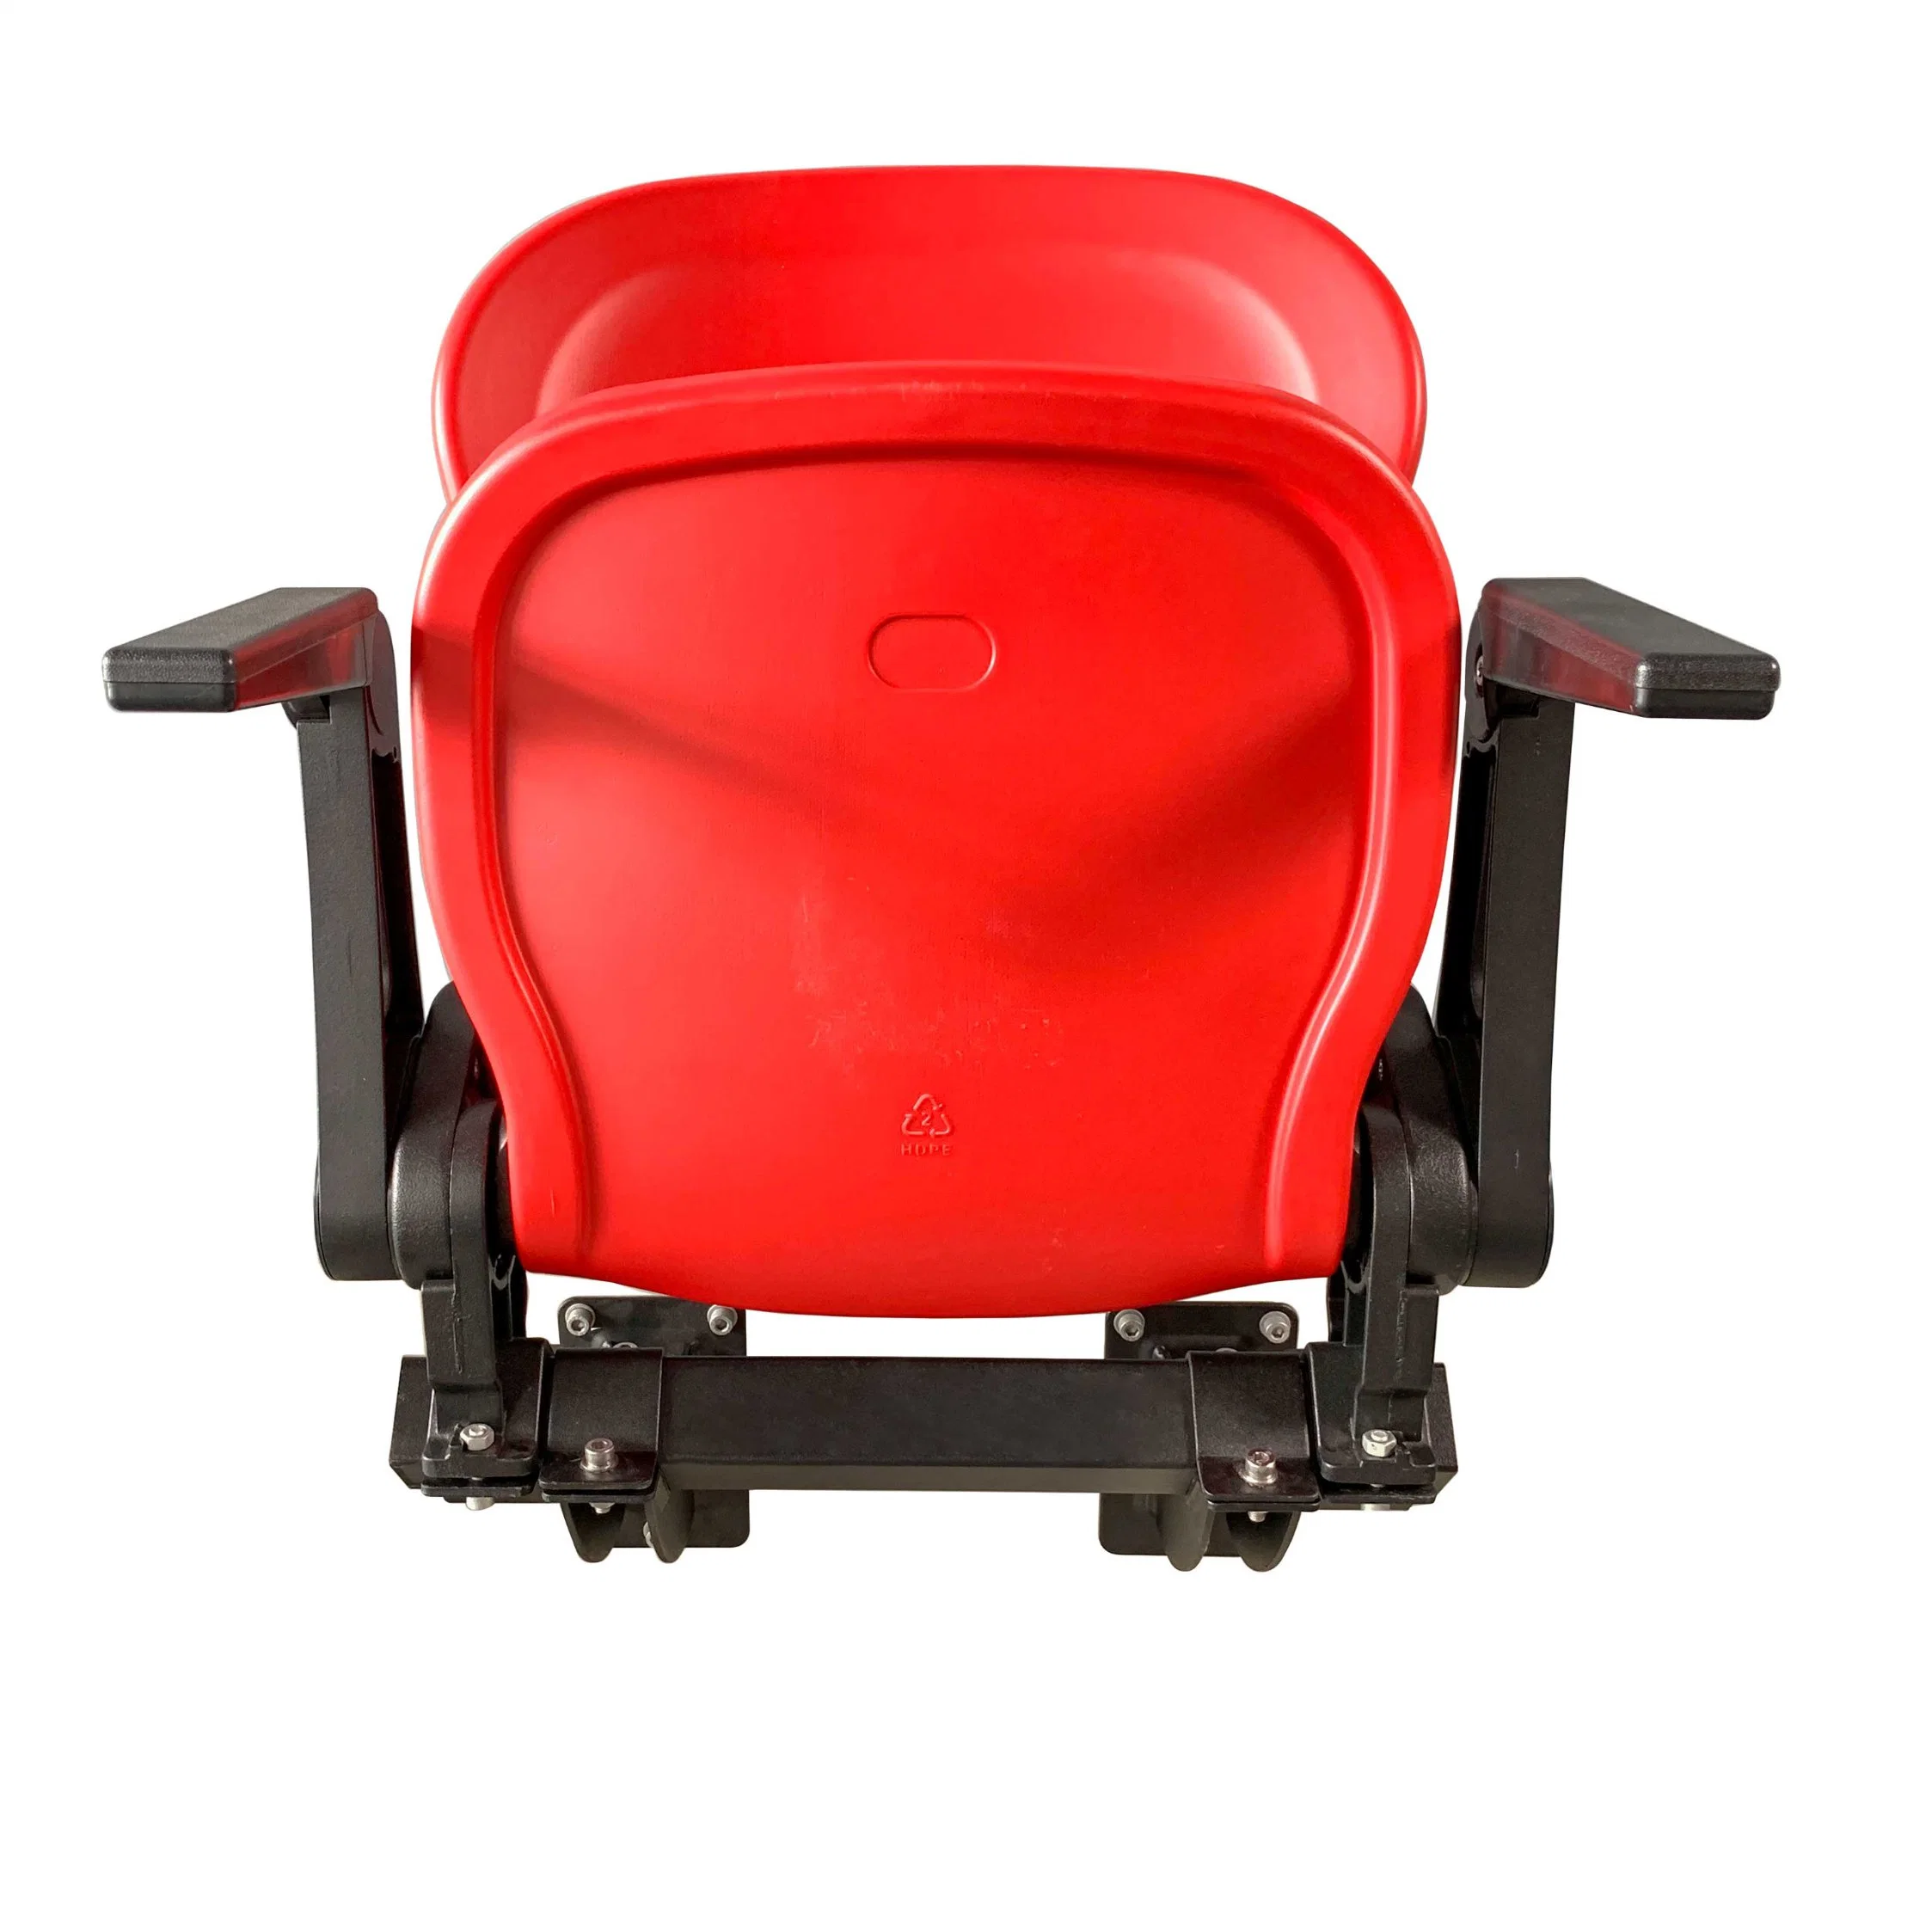 Wholesale/Supplier The Cheapest Price High quality/High cost performance SGS En12727 Level 4 Church Theater Auditorium HDPE Blow Molded Folding Stadium Seating Church Seat and Cushions